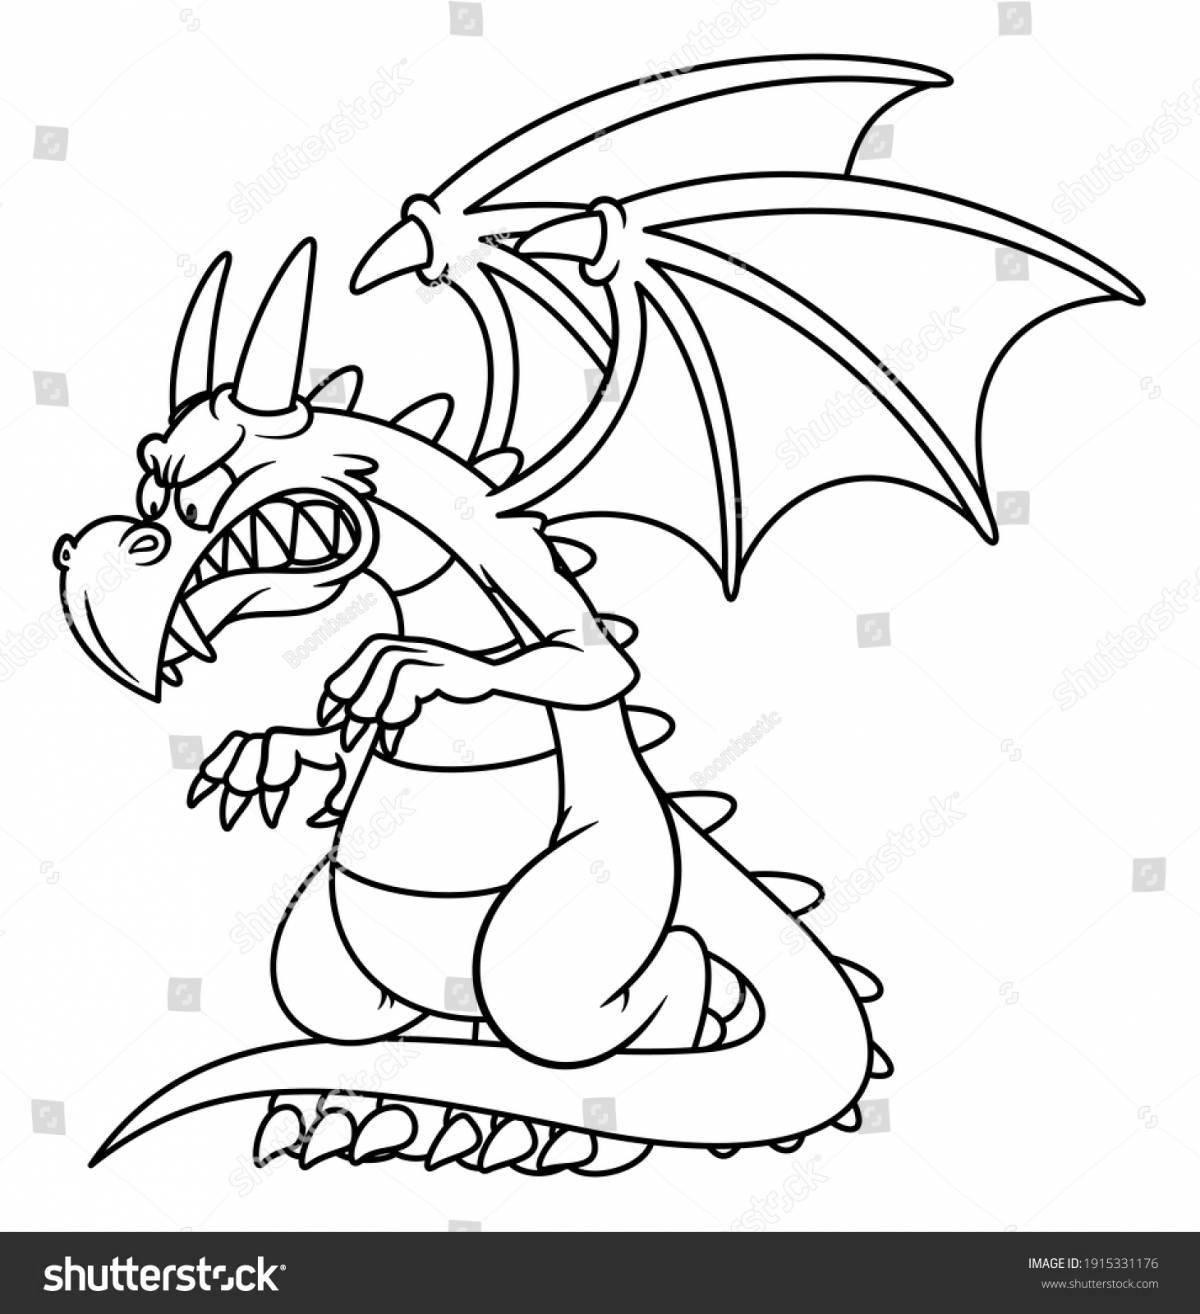 Exalted dragon with wings coloring page